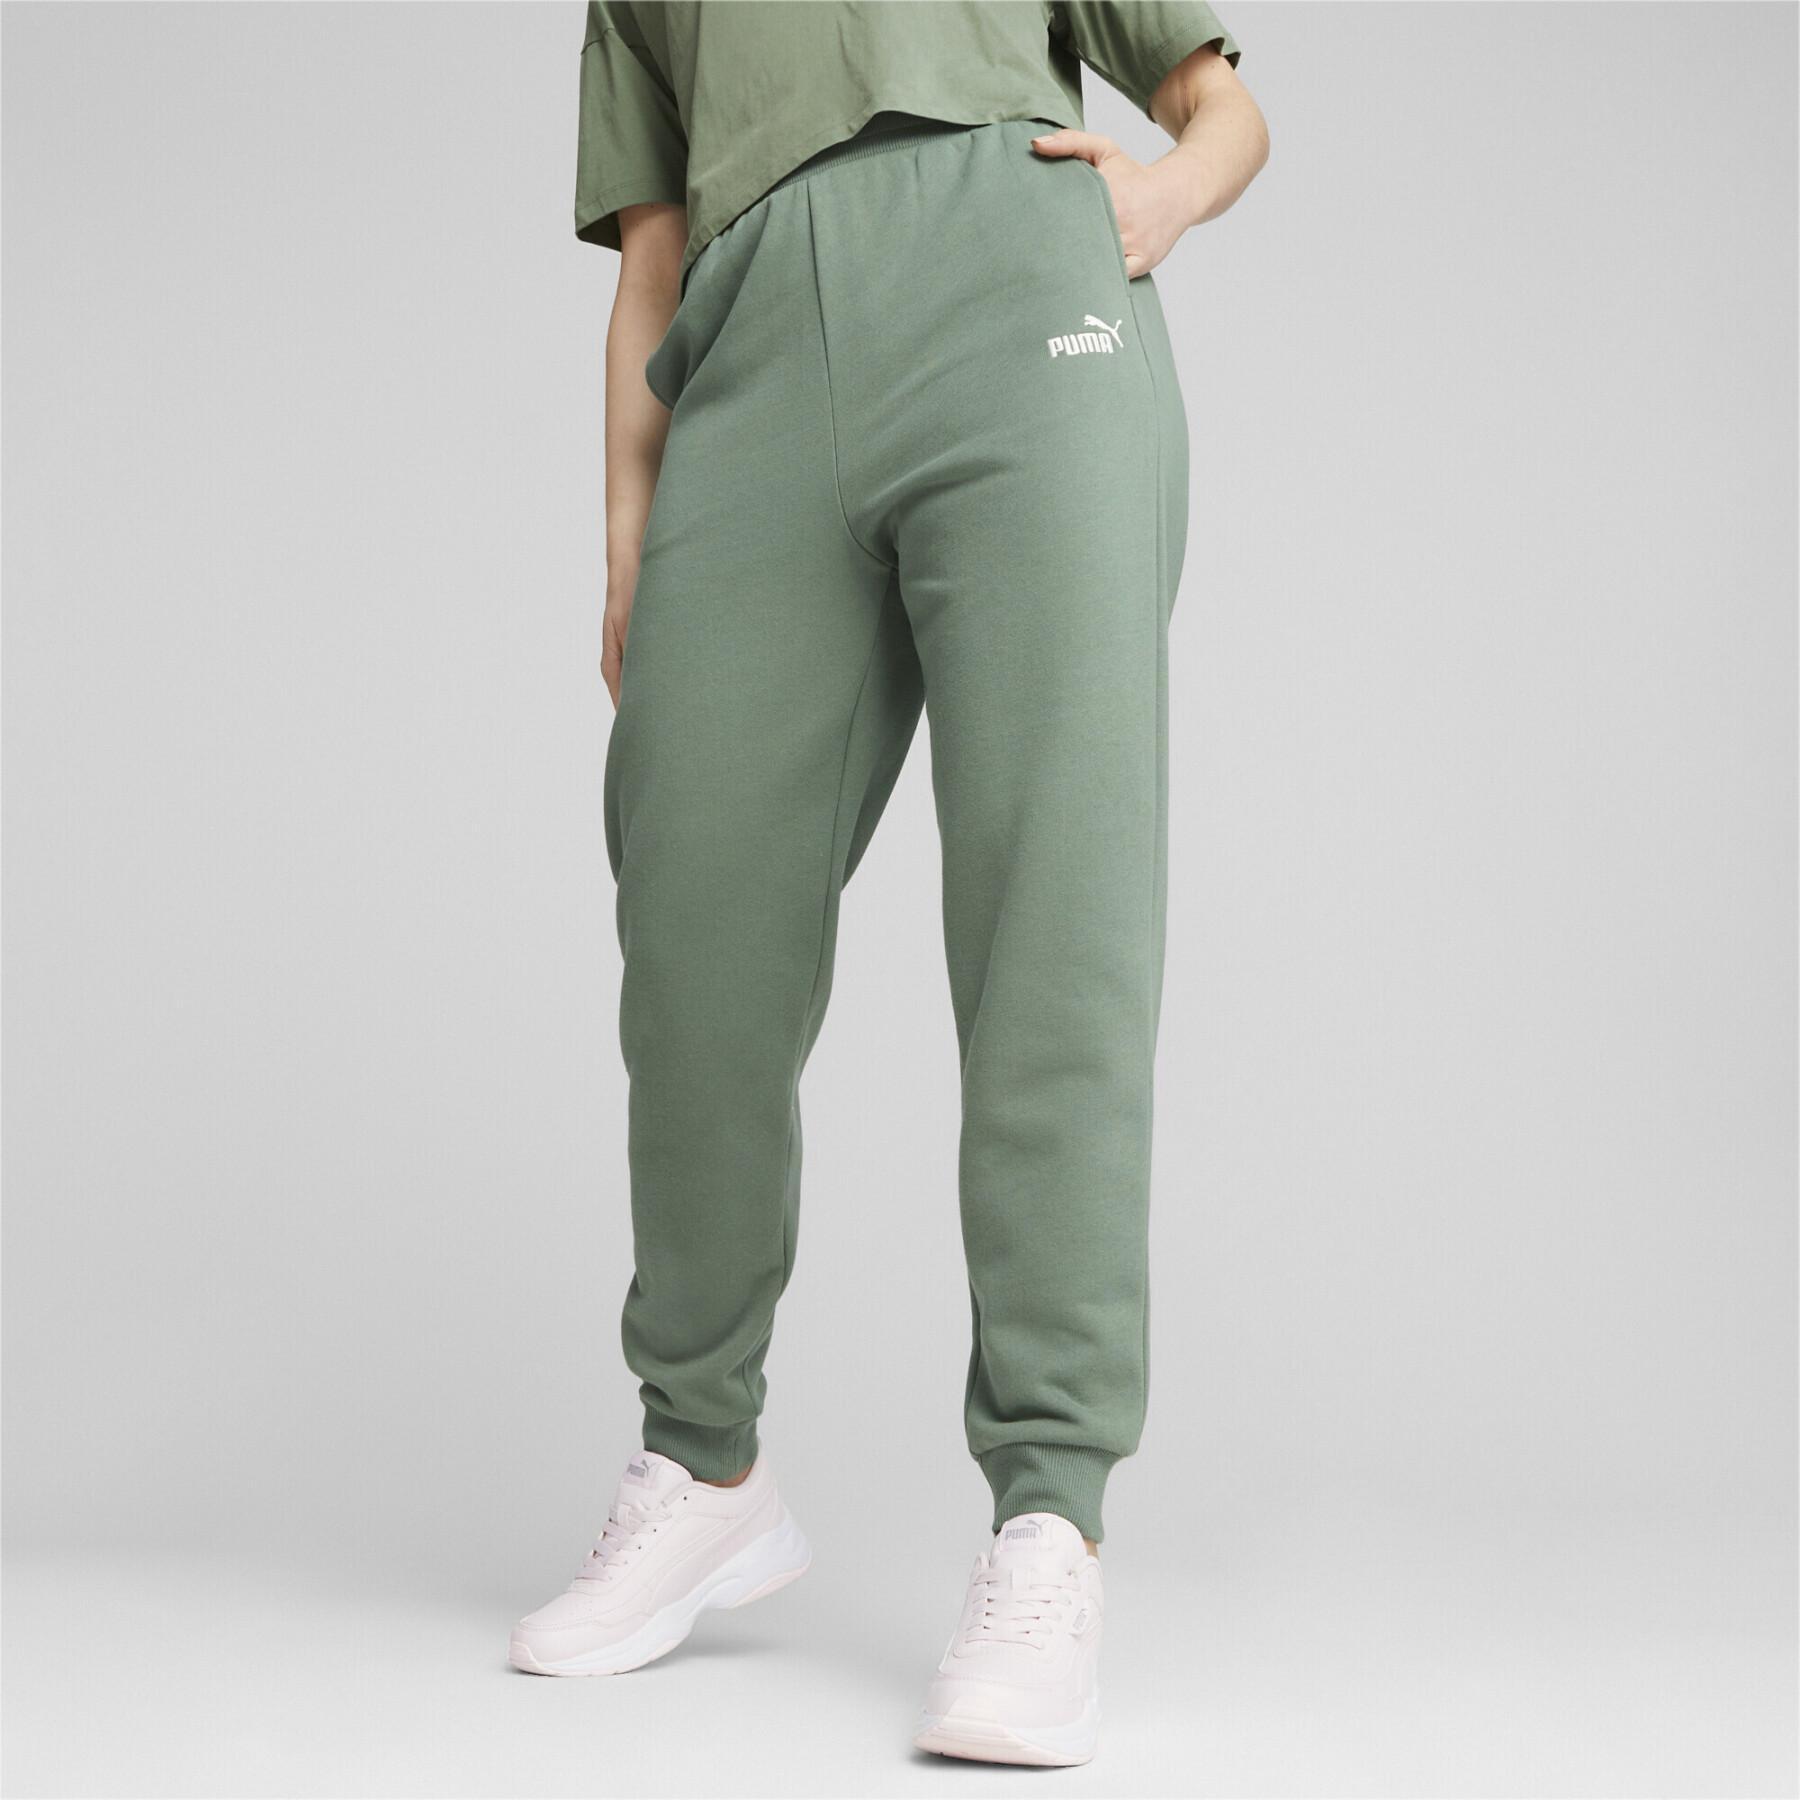 Women's embroidered high-waisted jogging suit Puma Essentials+ FL cl -  Pants - Lifestyle Woman - Lifestyle